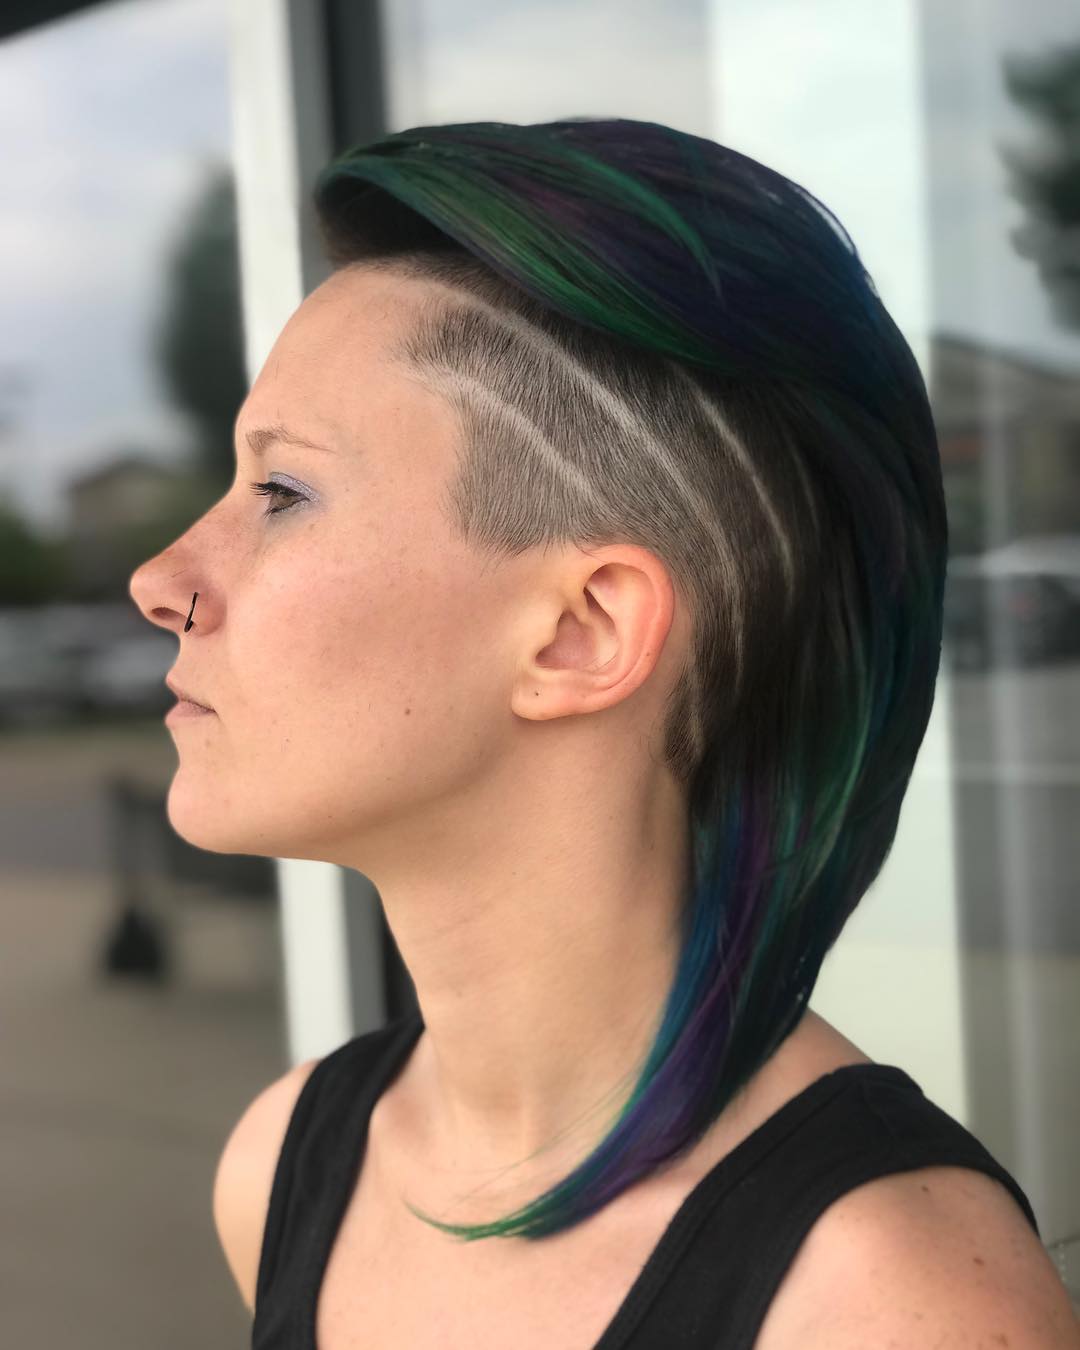 Mohawk styled. Pic by blushhairlove